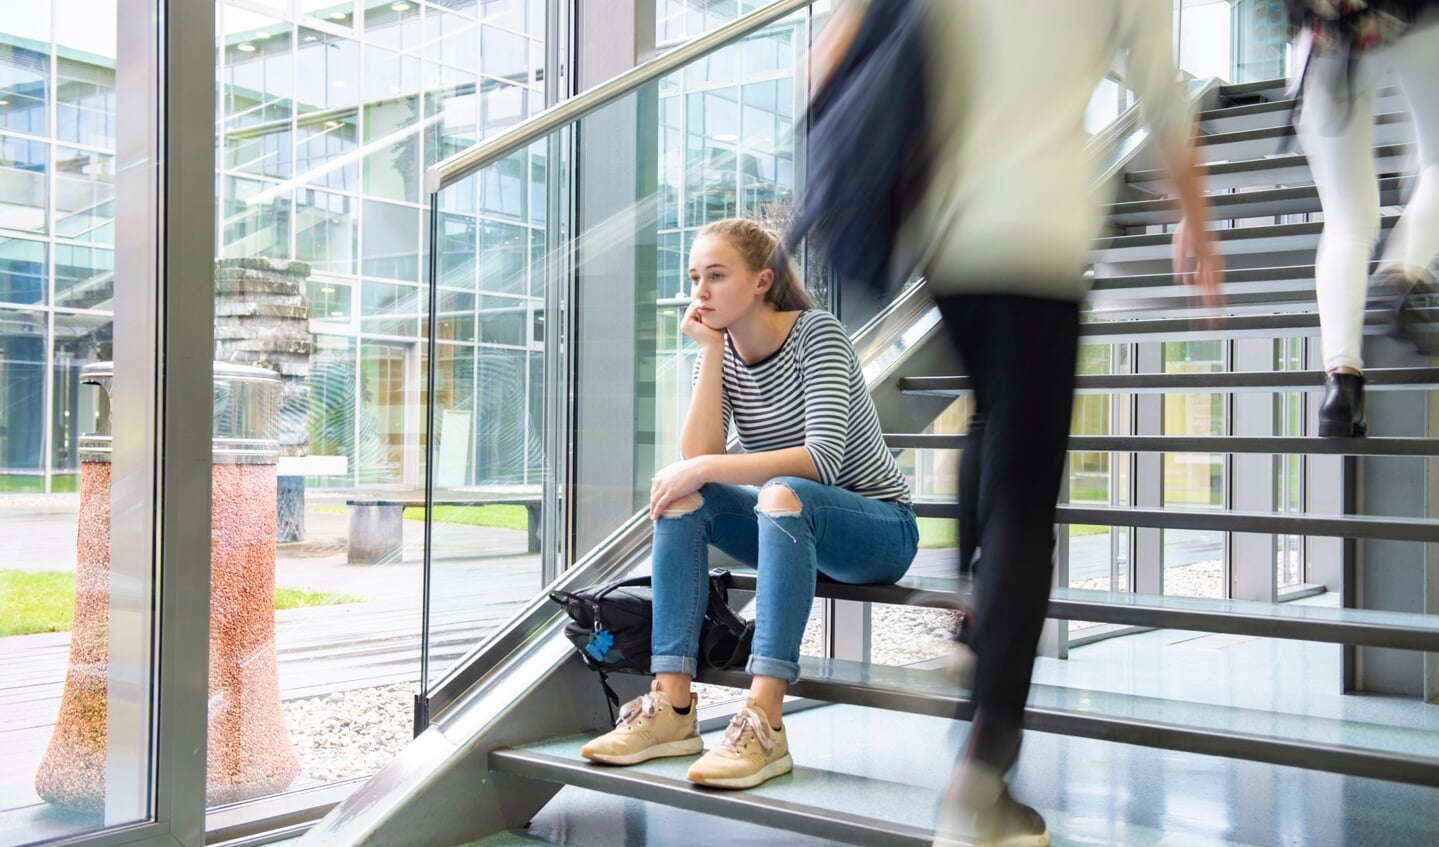 High school students walking on stairs between lessons in college building,sad schoolgirl sitting alone on staircase